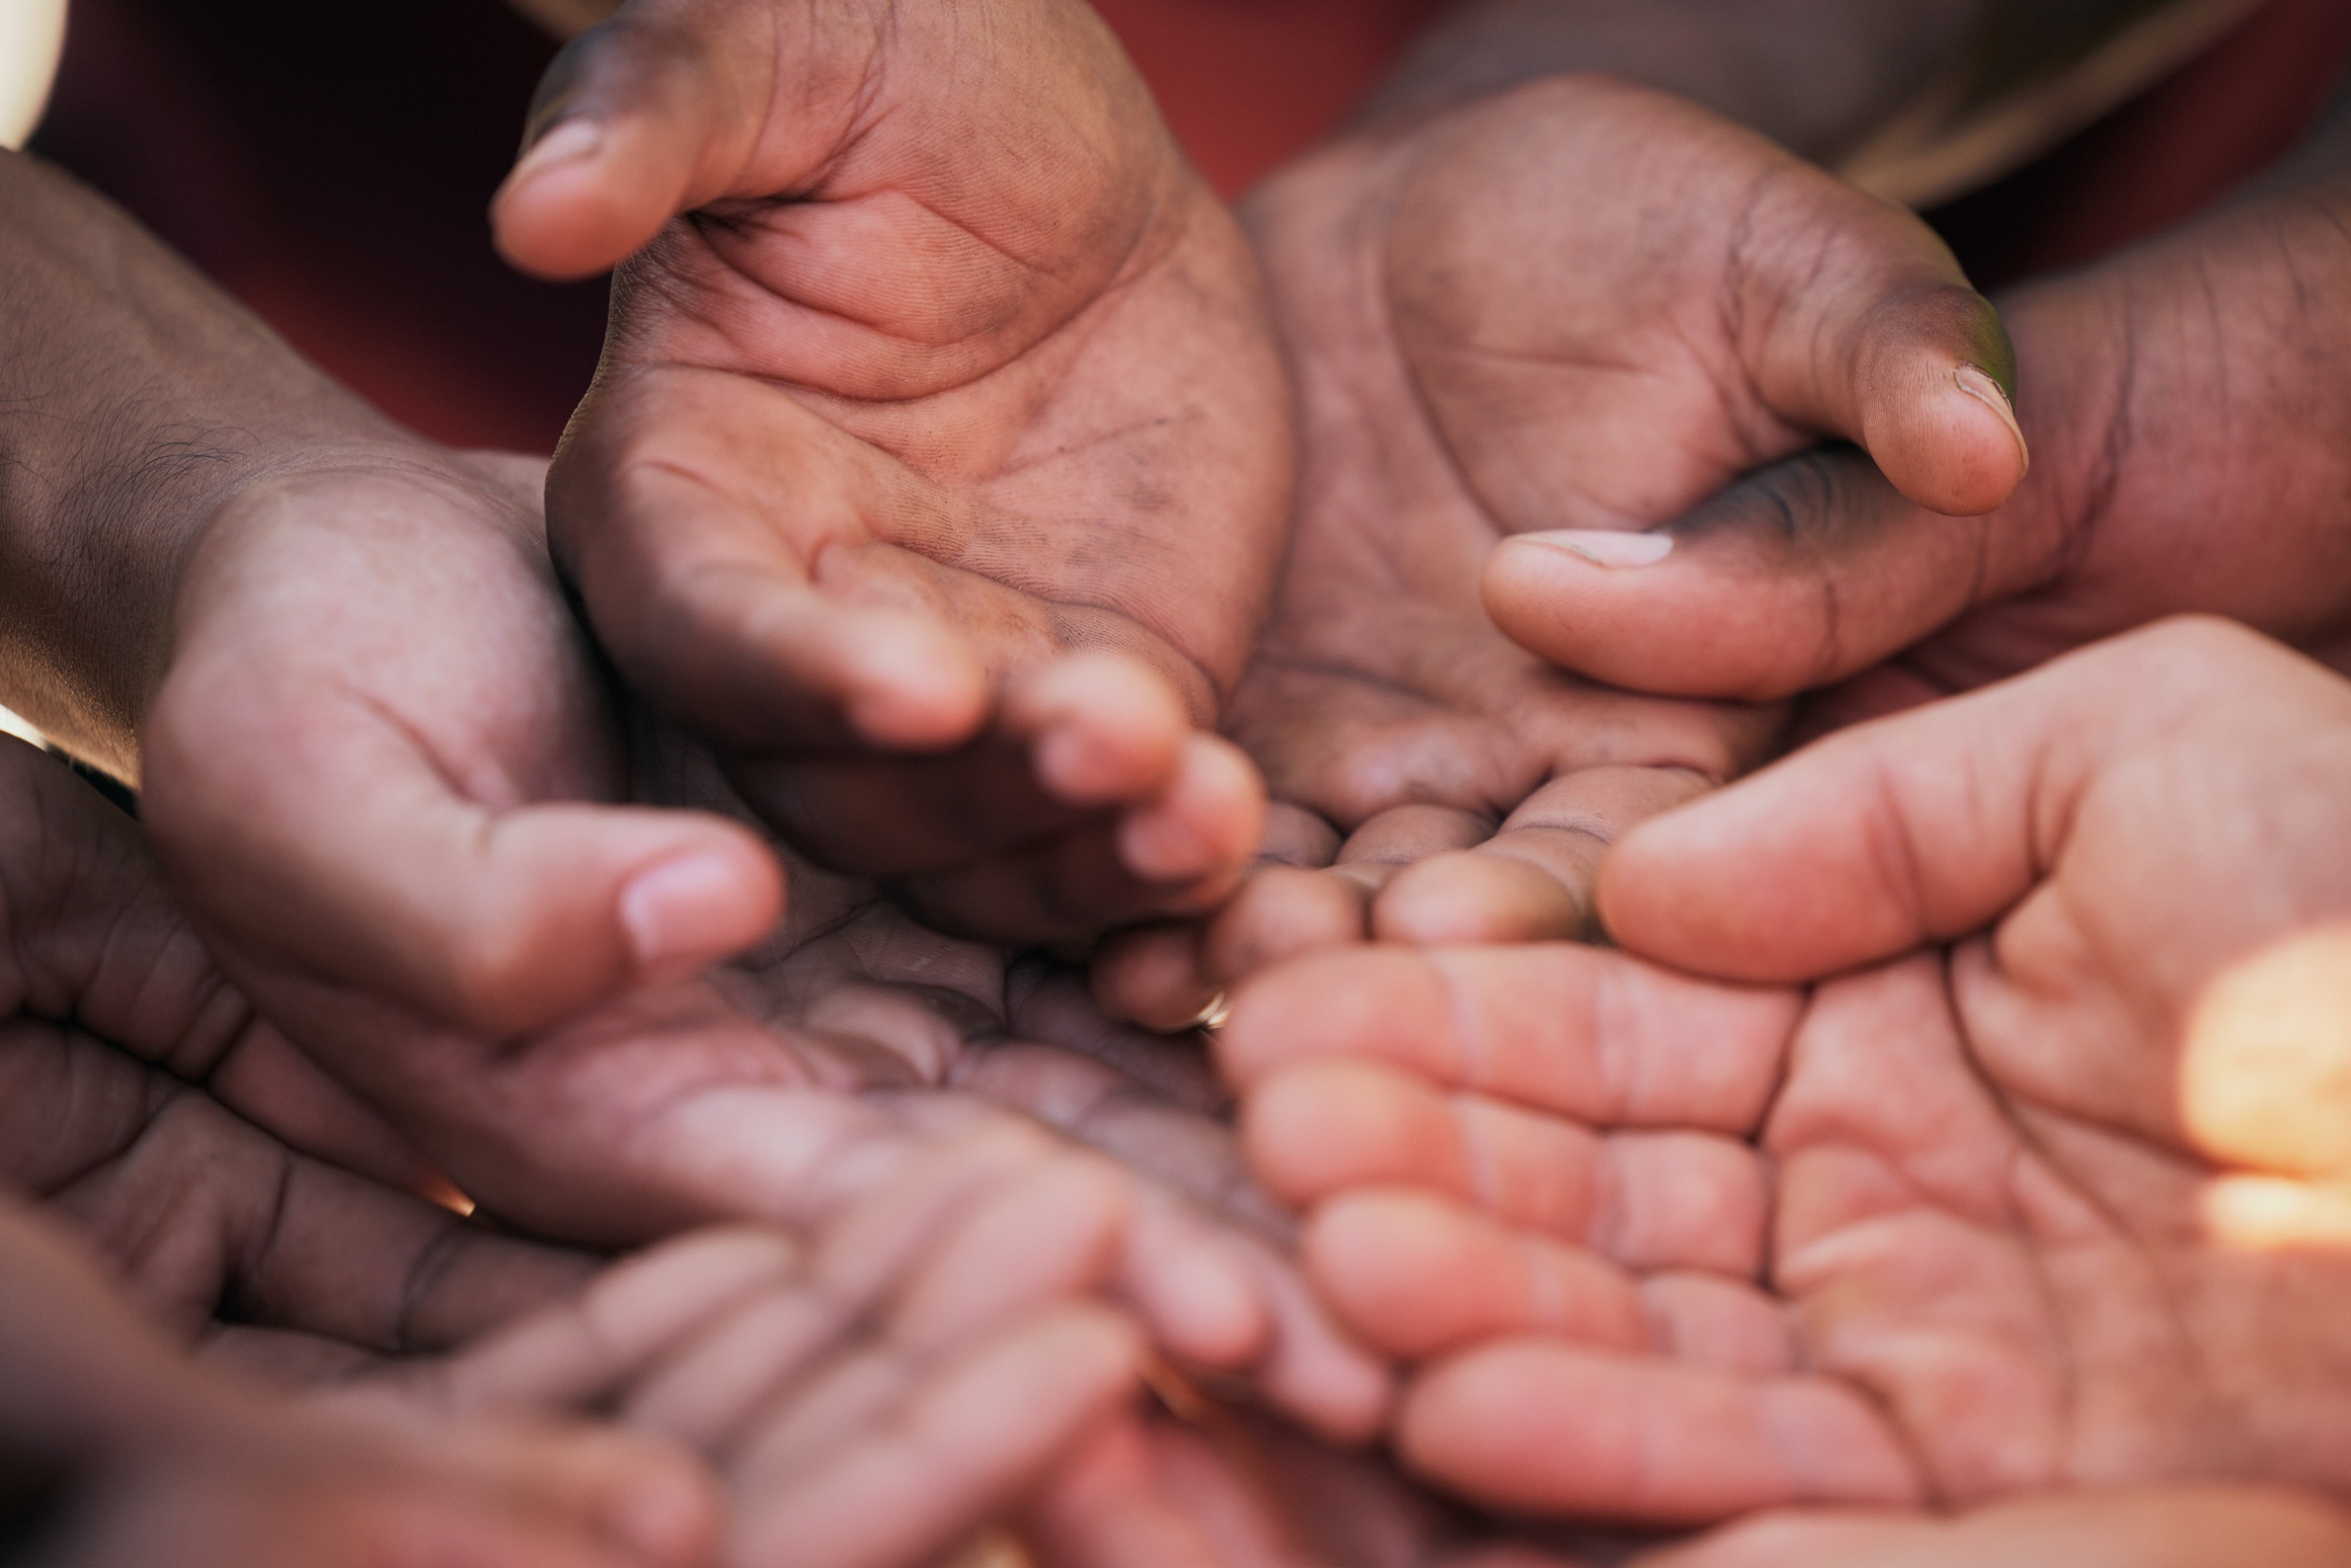 Hands, Palm and Diversity of People in Circle for Charity, Ngo and Support in Poor Community Together from above. Helping Hand, Donation and Empathy for Children in Poverty, Society and Crowdfunding